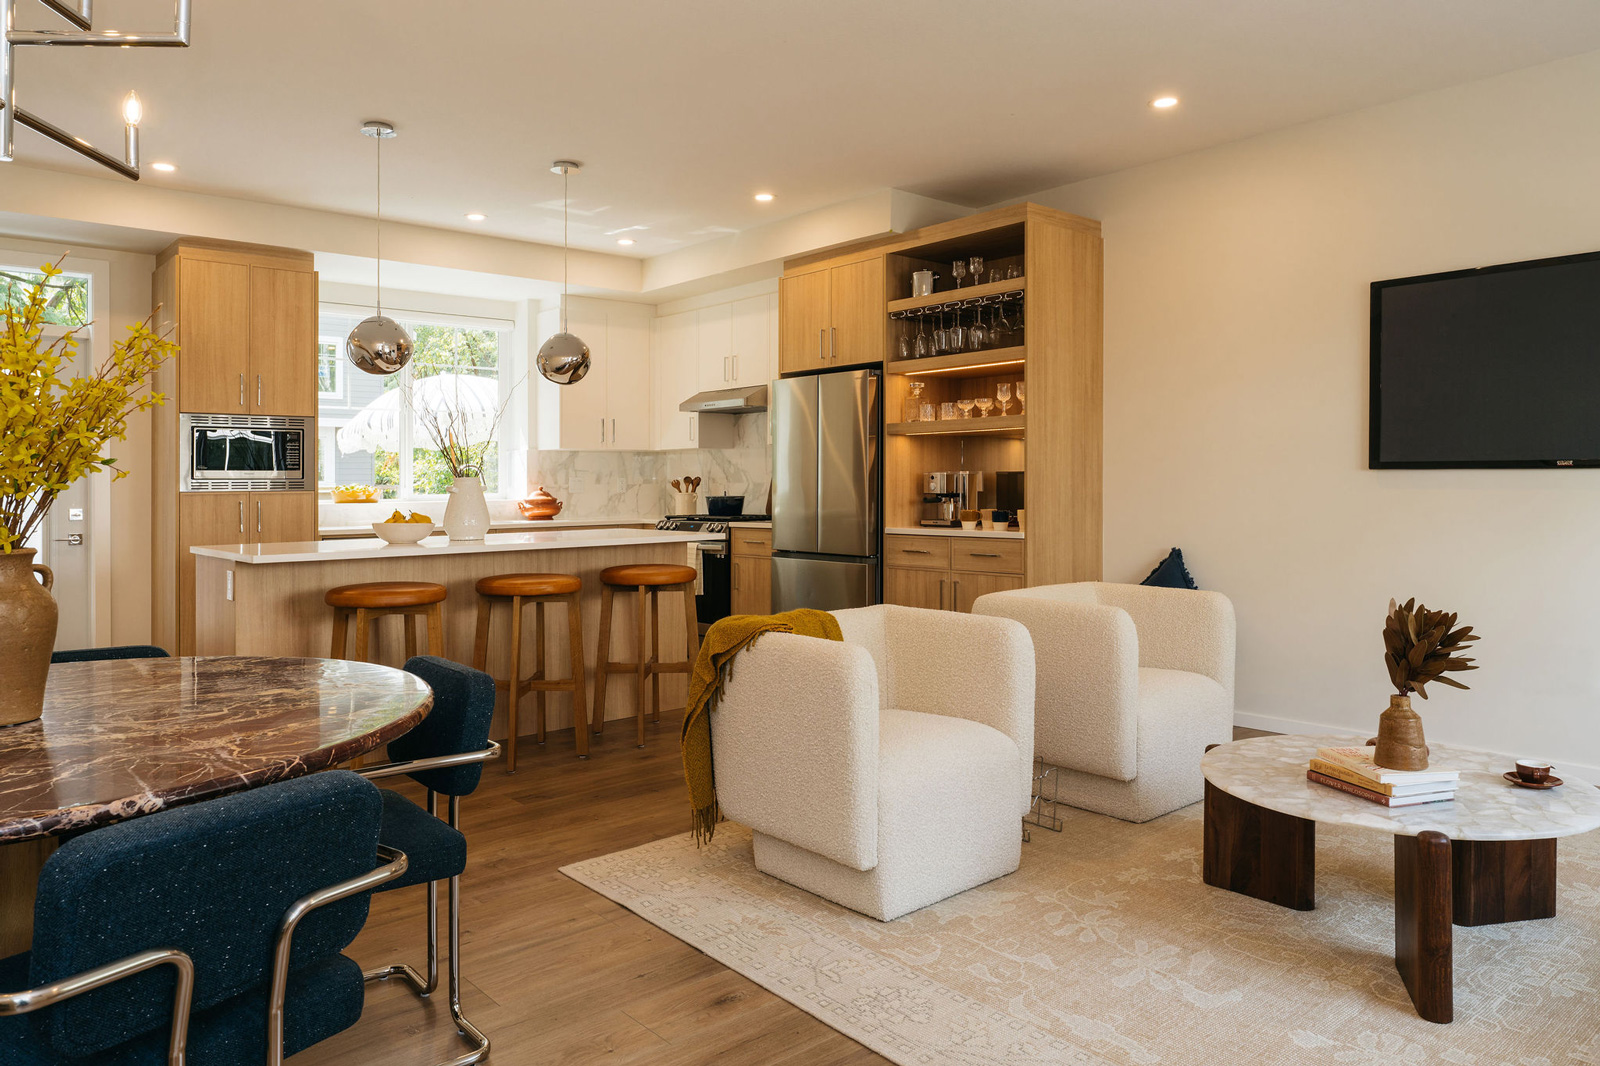 kinship living open living space with kitchen and balcony access